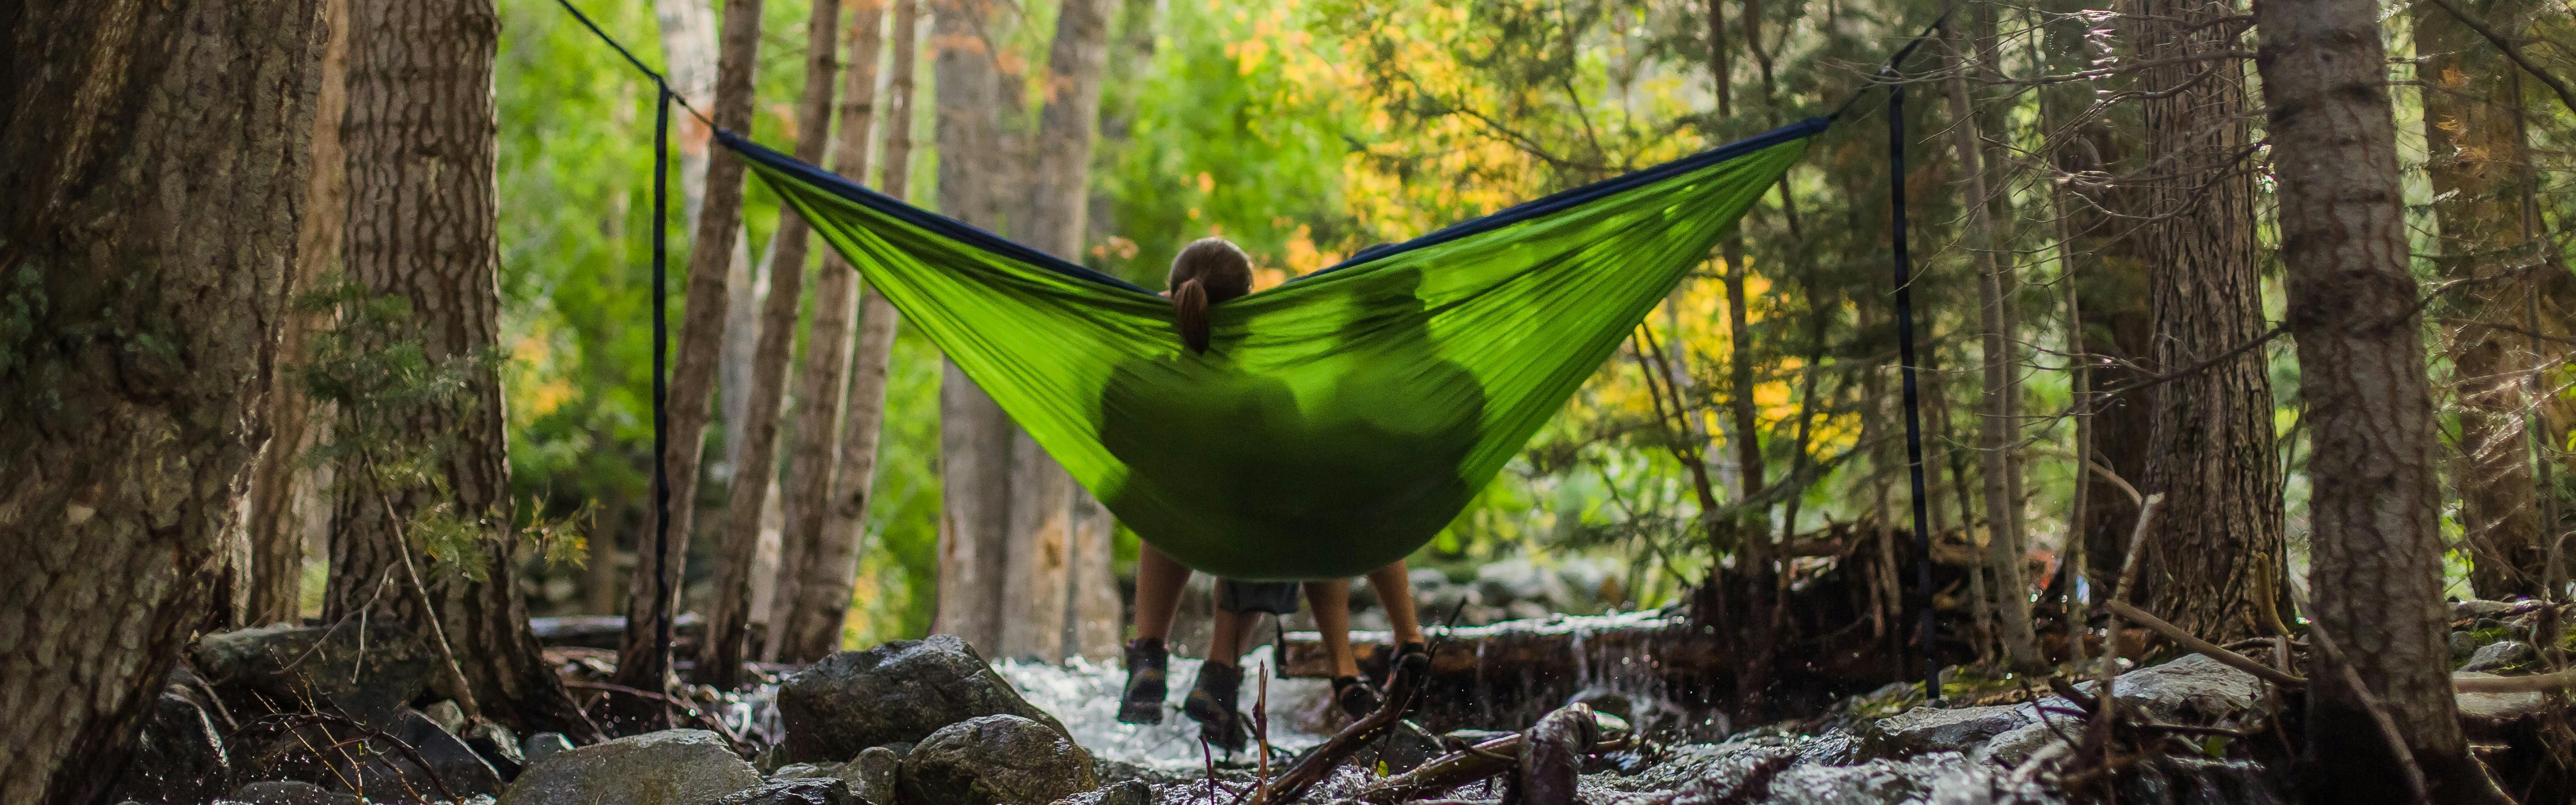 Two people sit in a green hammock in the forest